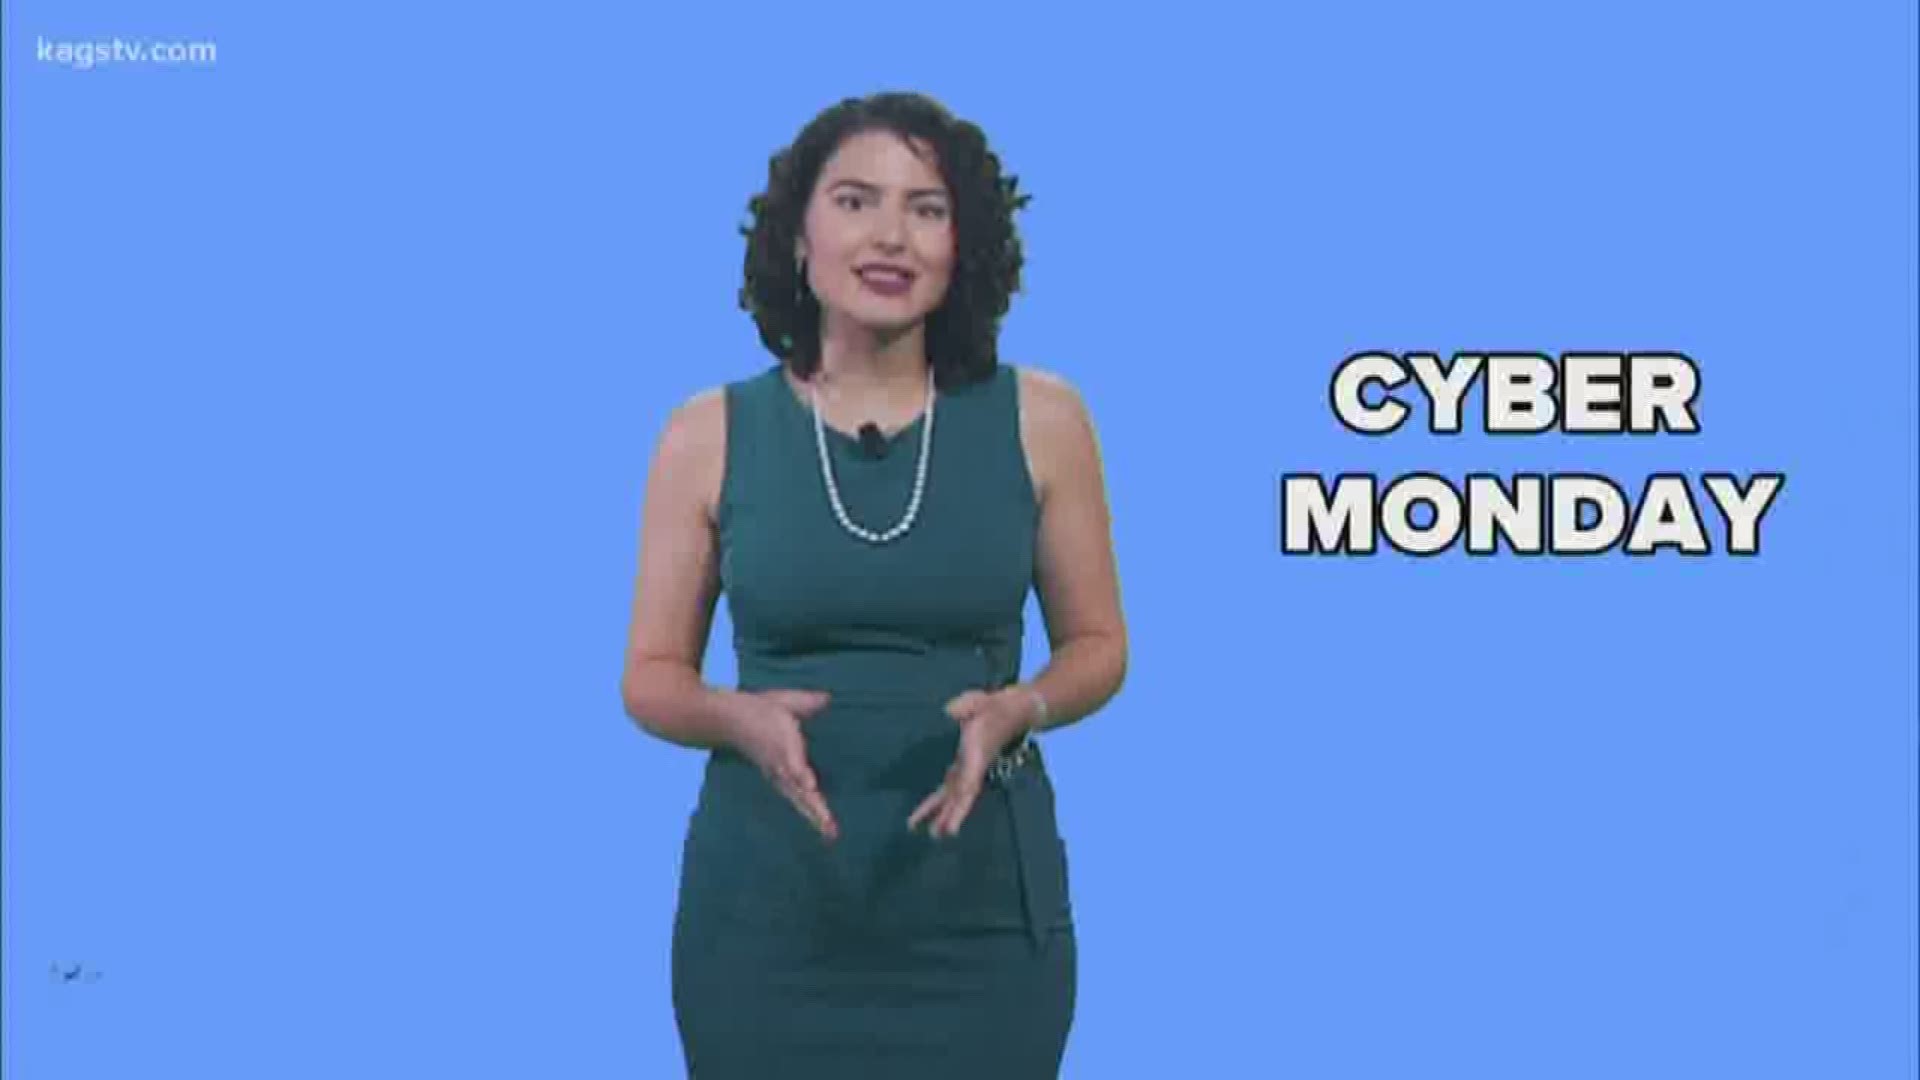 Gabriela Garcia gives a sneak peek at some Cyber Monday deals and steals.